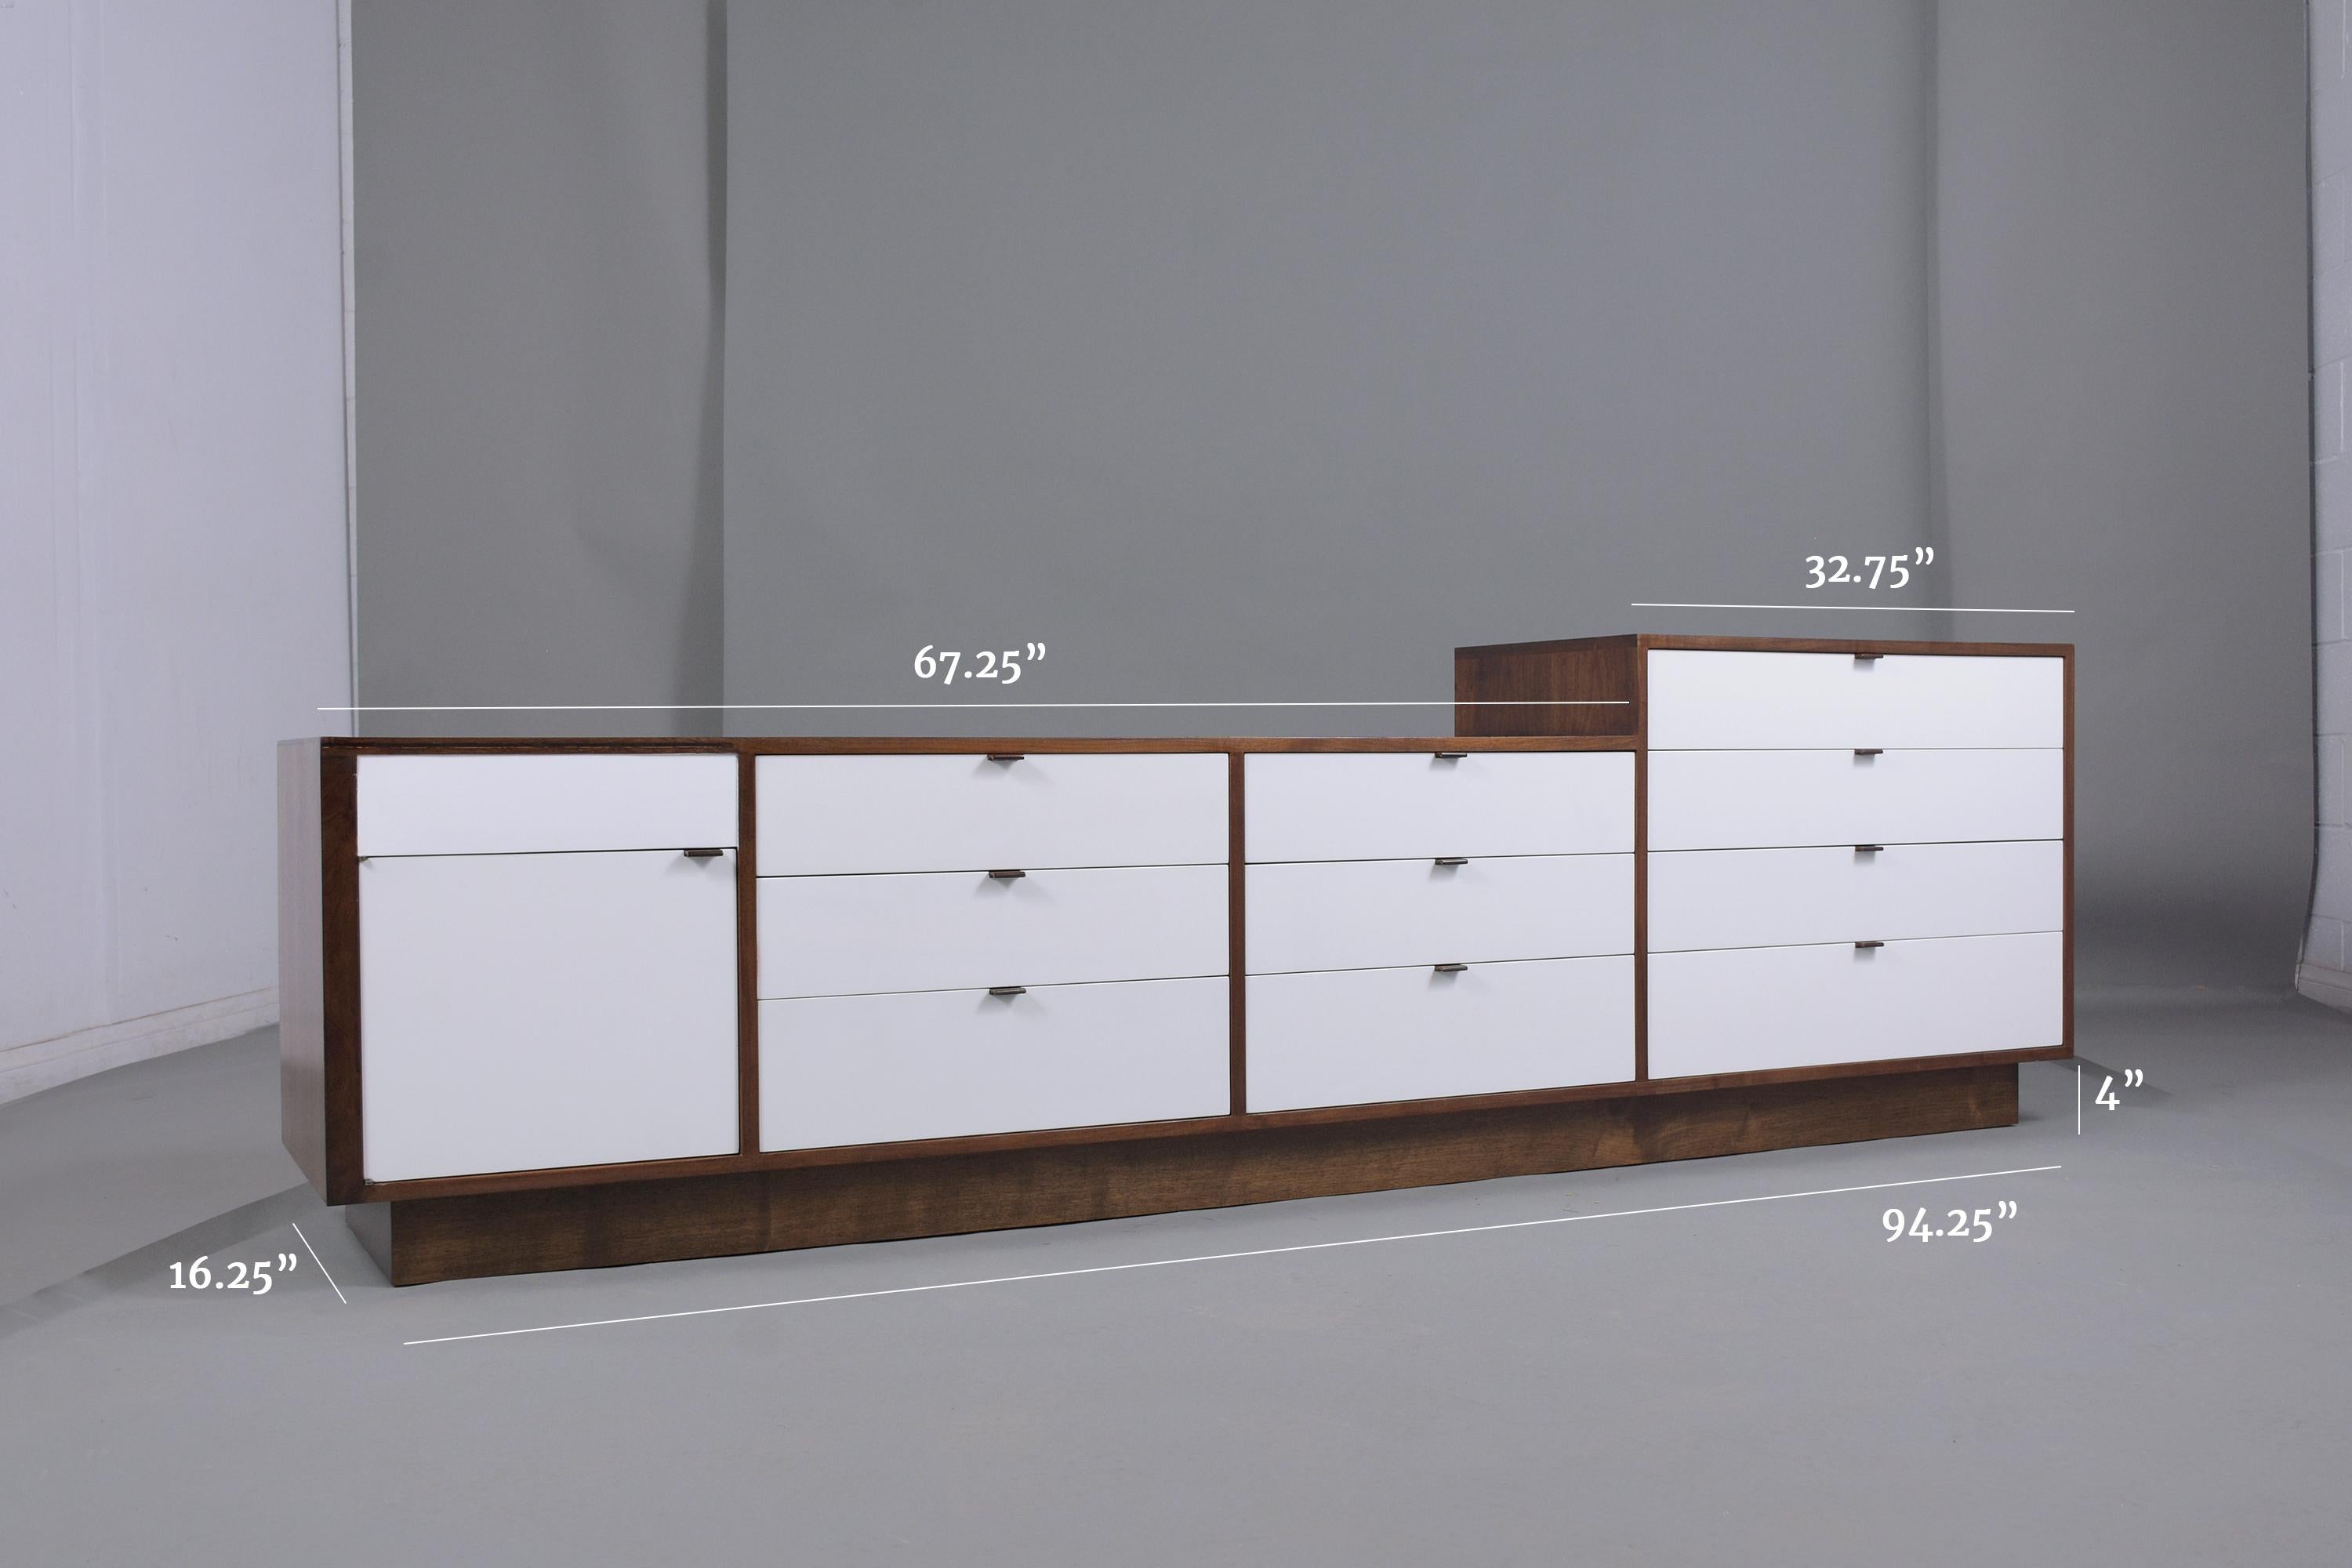 This mid-century 1960s executive credenza attributed to Milo Baughman is hand-crafted out of walnut wood and has been professionally restored by our craftsmen. The dresser is newly stained in walnut and white color combination with a lacquered